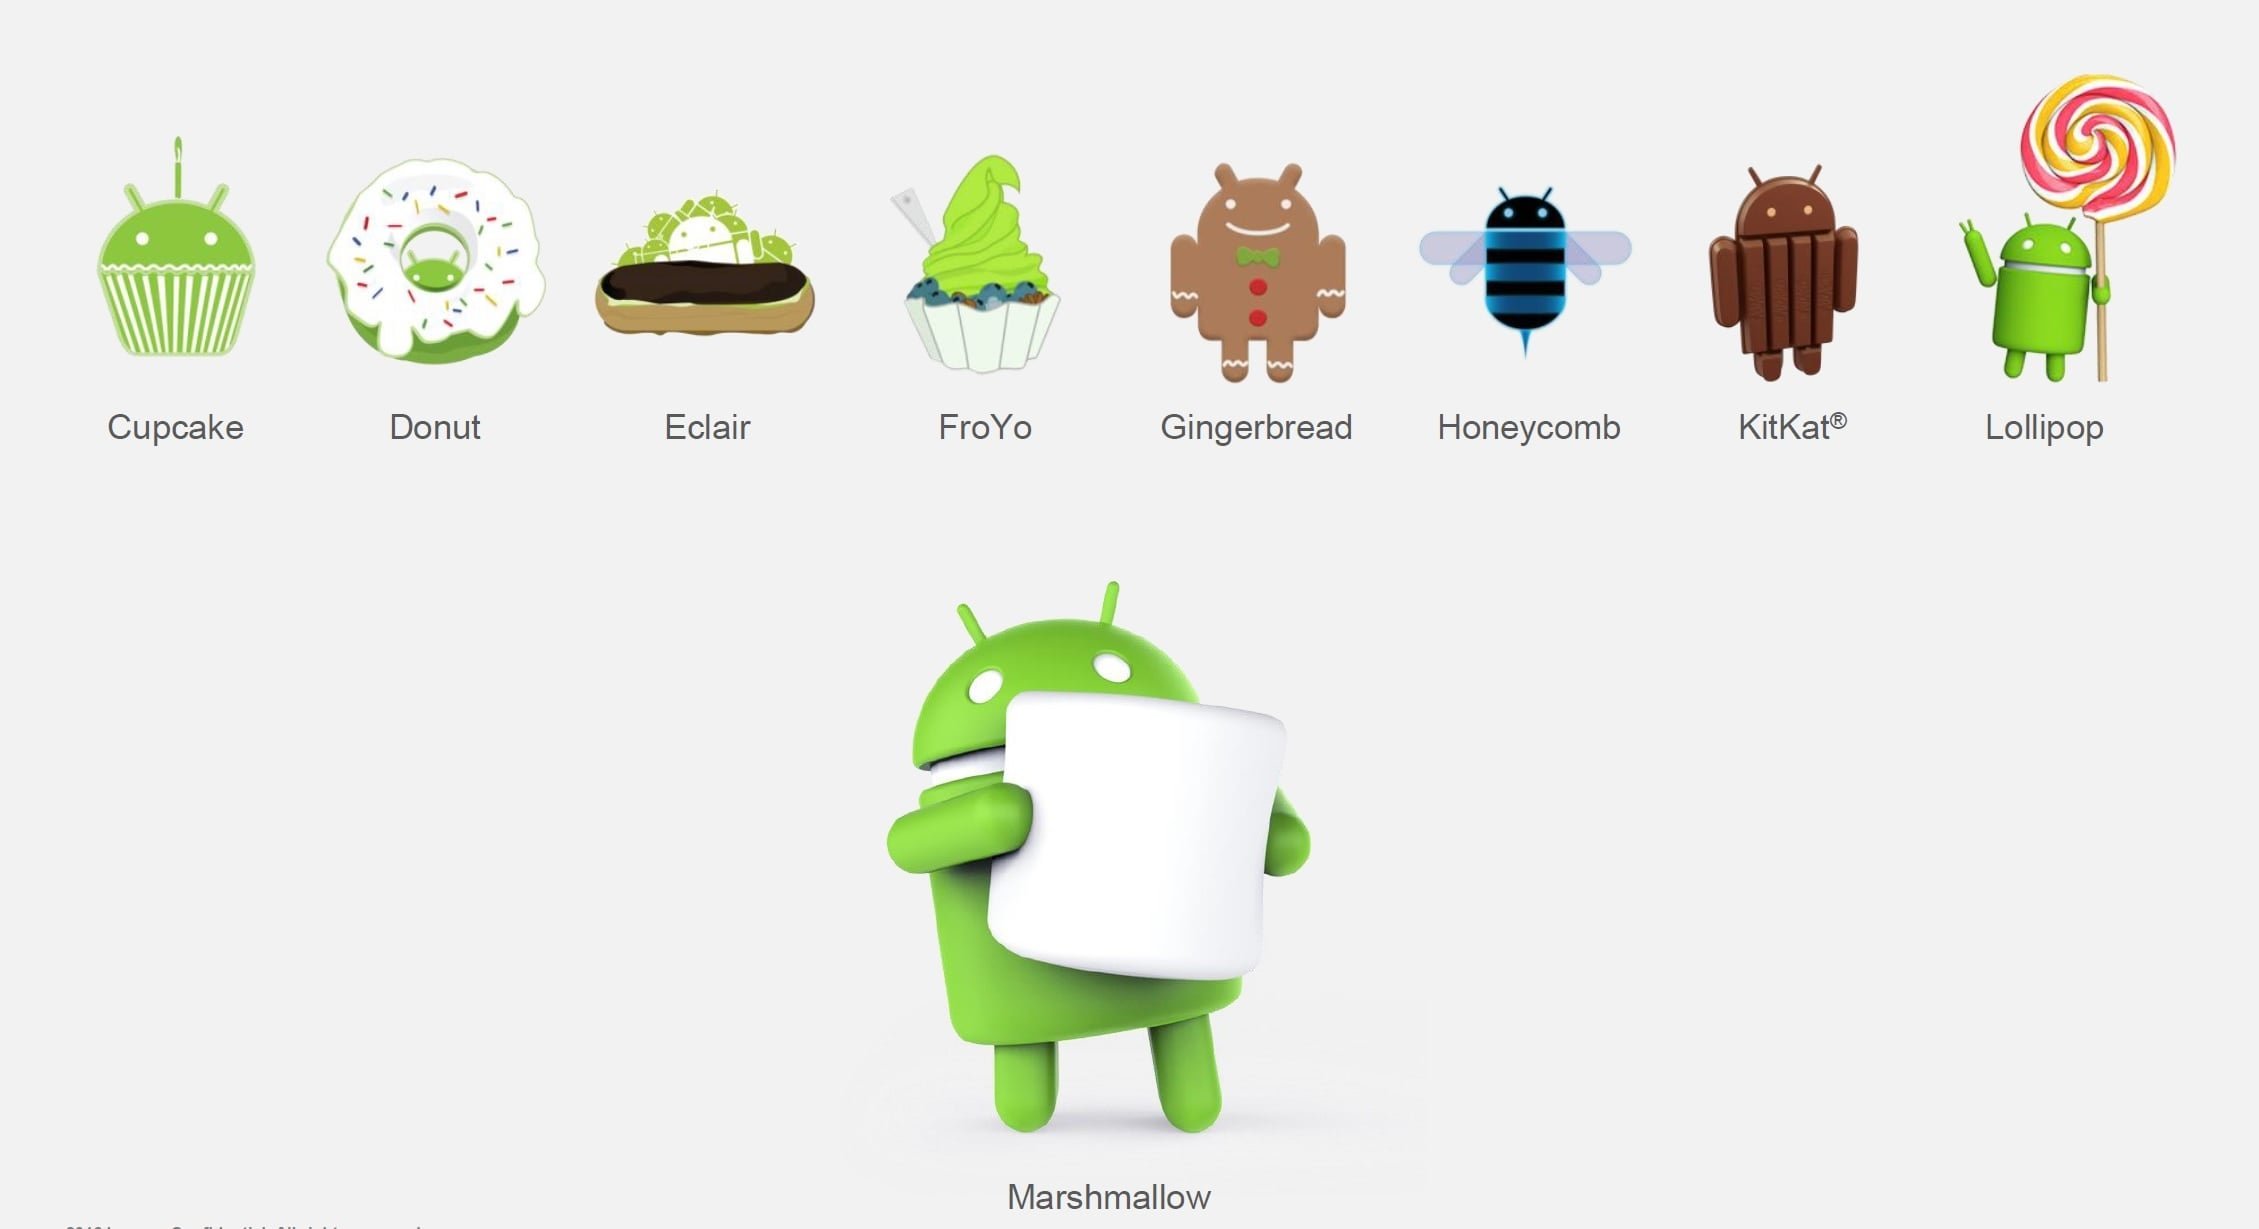 Android-Cupcake-Android-Donut-Android-Eclair-Android-Froyo-Android-Gingergread-Android-Honeycomb-Android-KitKat-Android-Lollipop-Android-Marshmallow